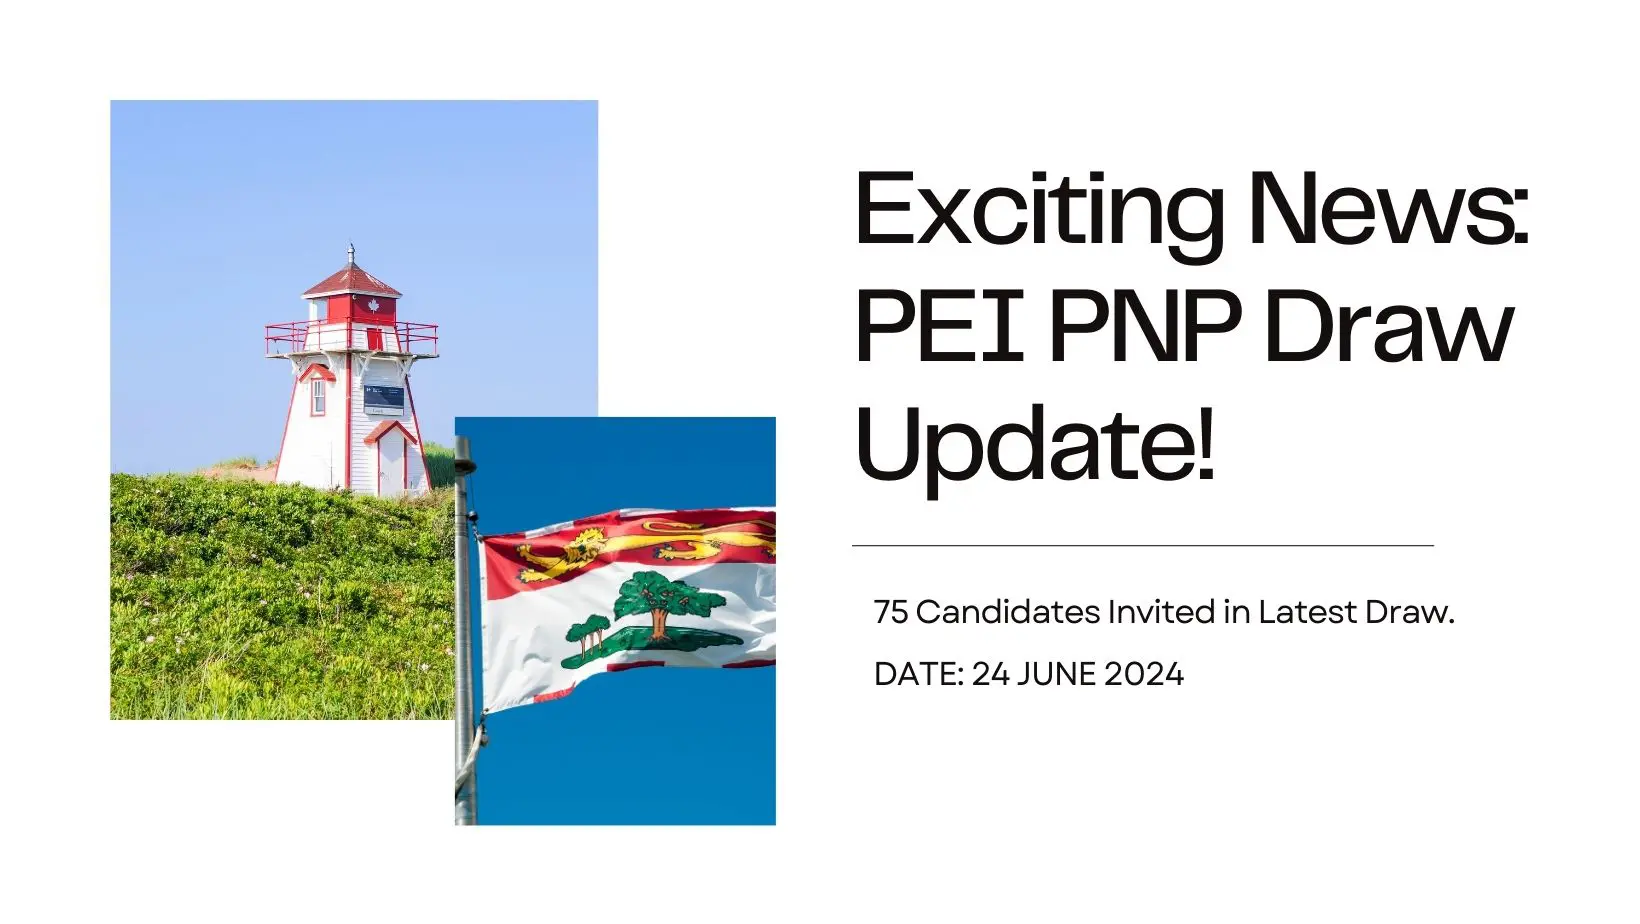 Exciting News PEI PNP Draw Update!